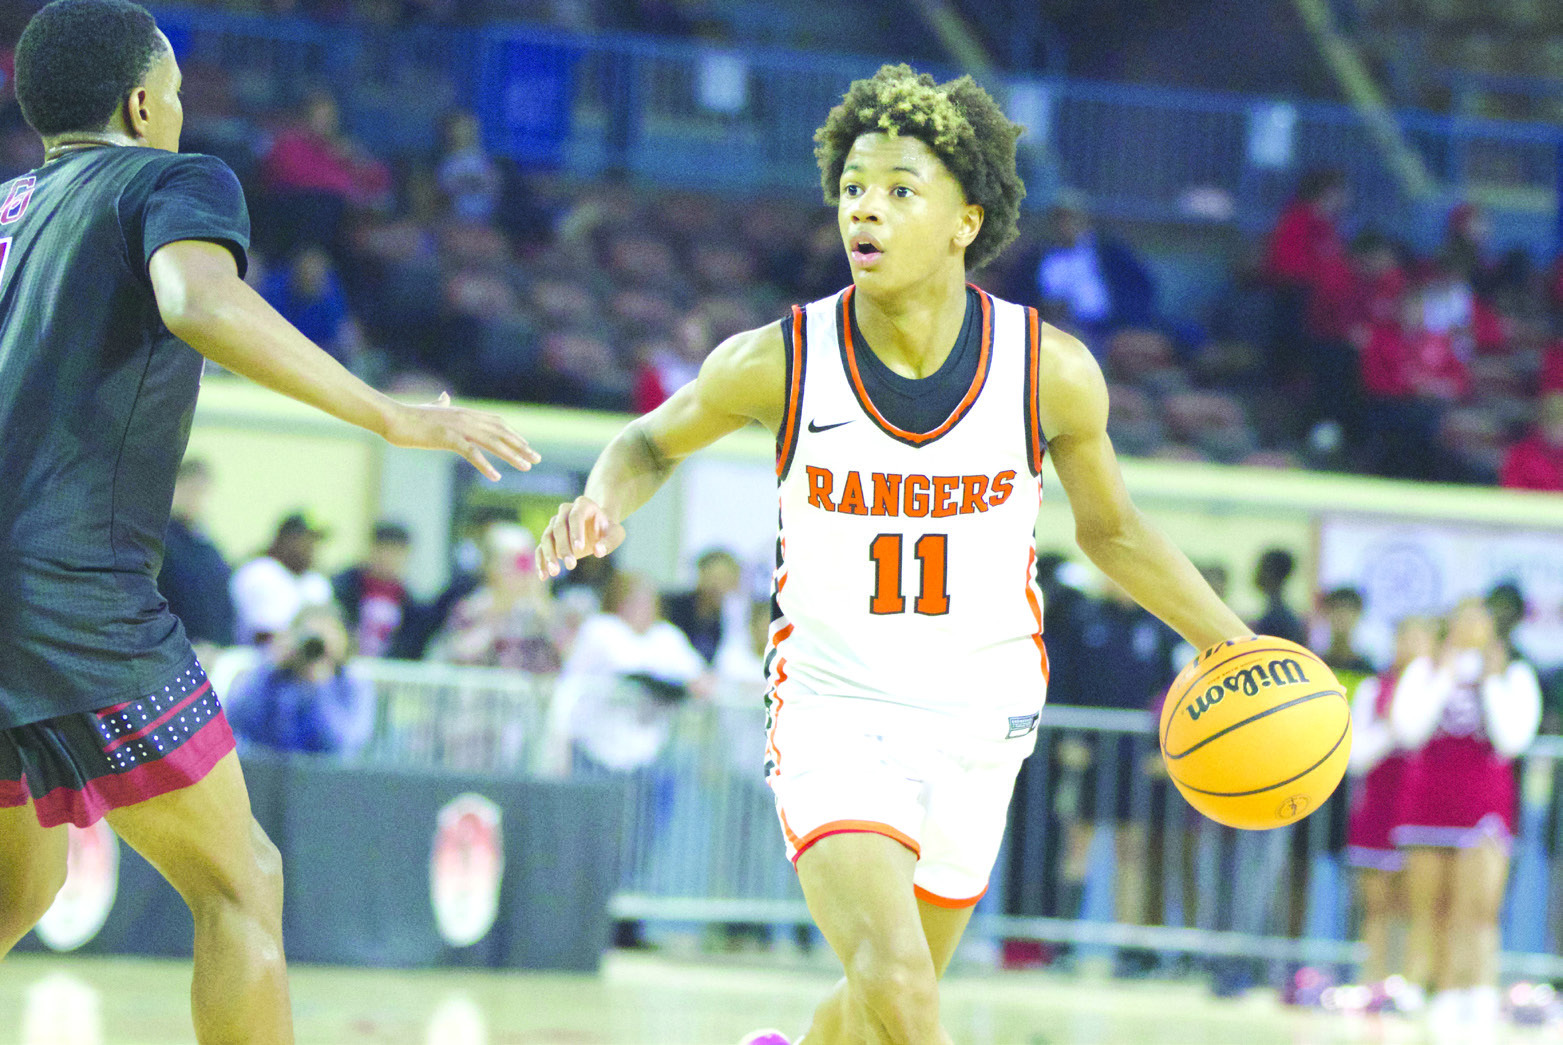 Roland freshman Davohn Hall sets up the offense during Thursday’s Class 3A state tournament quarterfinal contest against Crooked Oak at the State Fairgrounds. Hall totaled 11 points in the Rangers’ 62-46 loss to the Ruf-Nex. LEA LESSLEY •TIMES